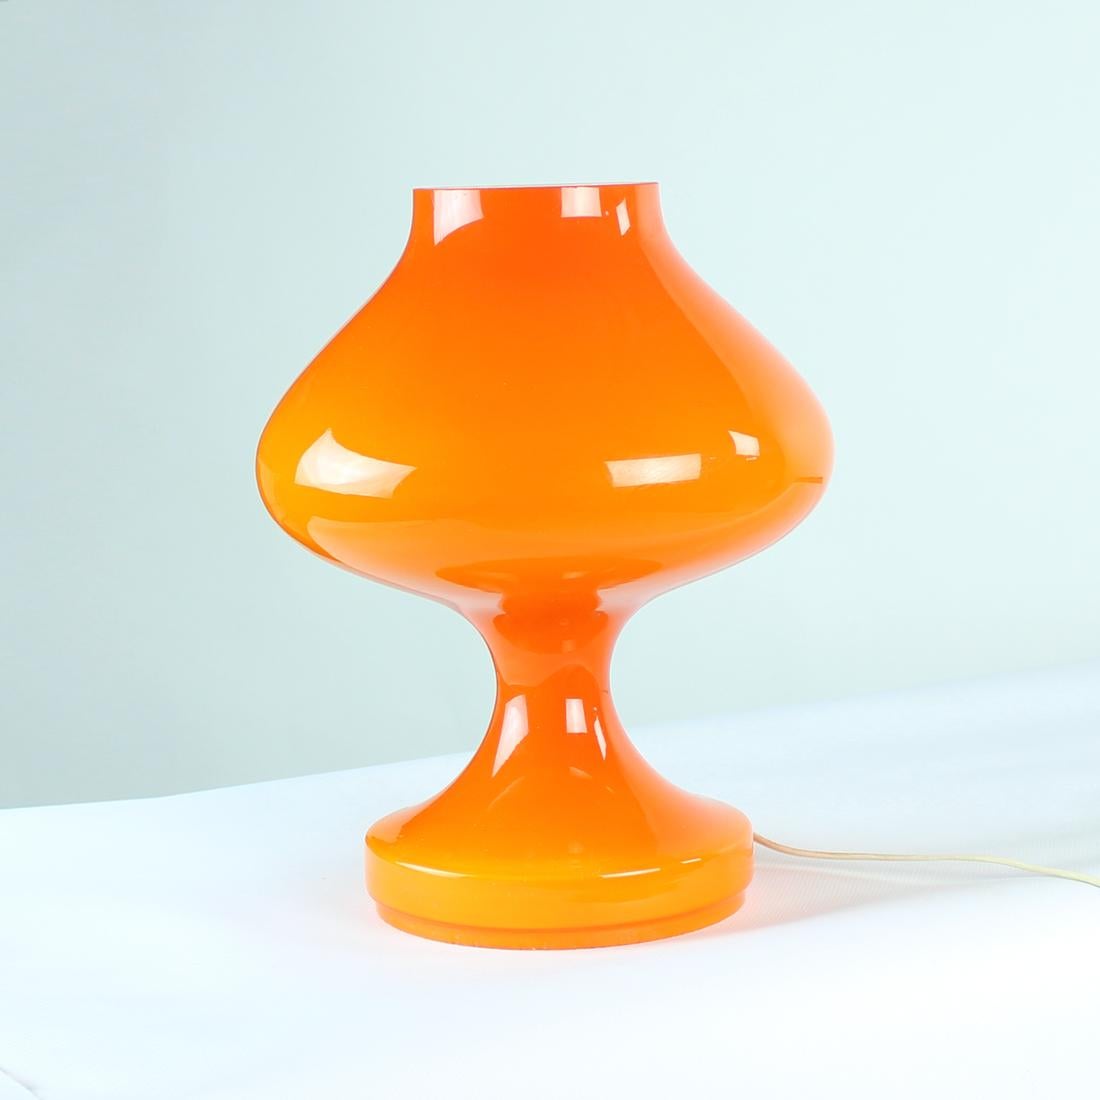 This is a beautiful table lamp with a statue like presence. Produced by OPP Jihlava in 1960s, designed by Stefan Tabery. The lamp is made out of one piece of orange opaline glass piece. No damage or chips on the glass, the lamp is in an excellent